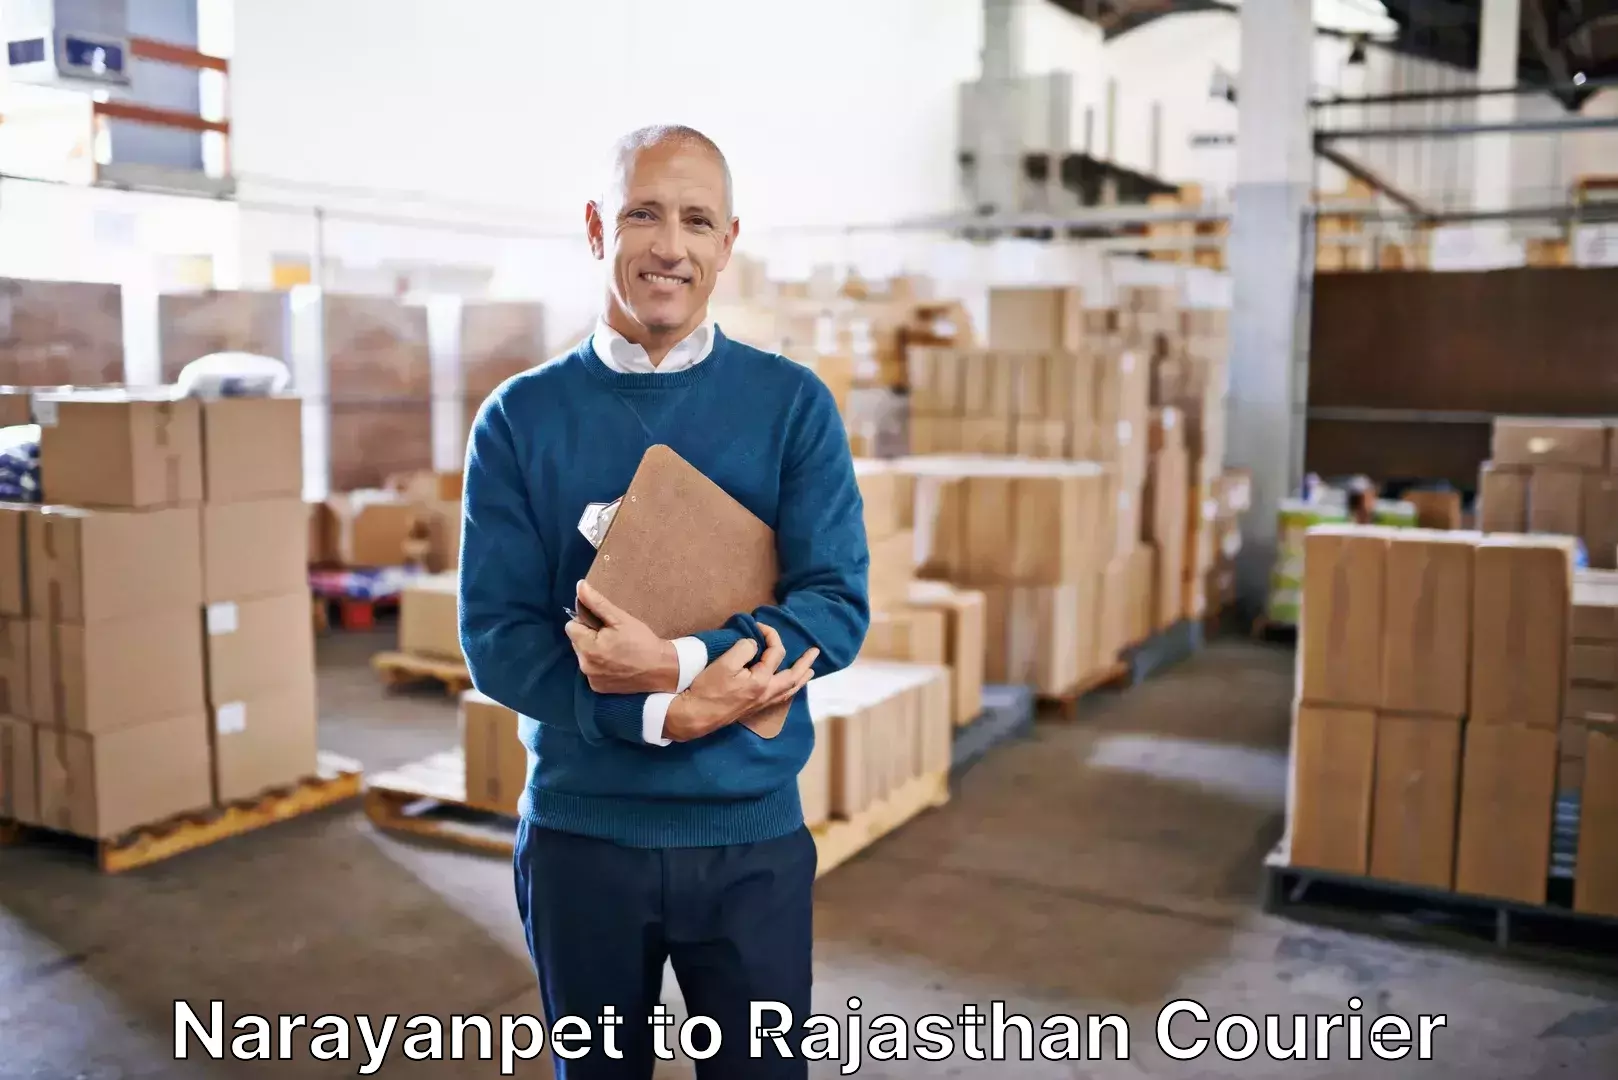 Luggage shipment specialists Narayanpet to Rajasthan